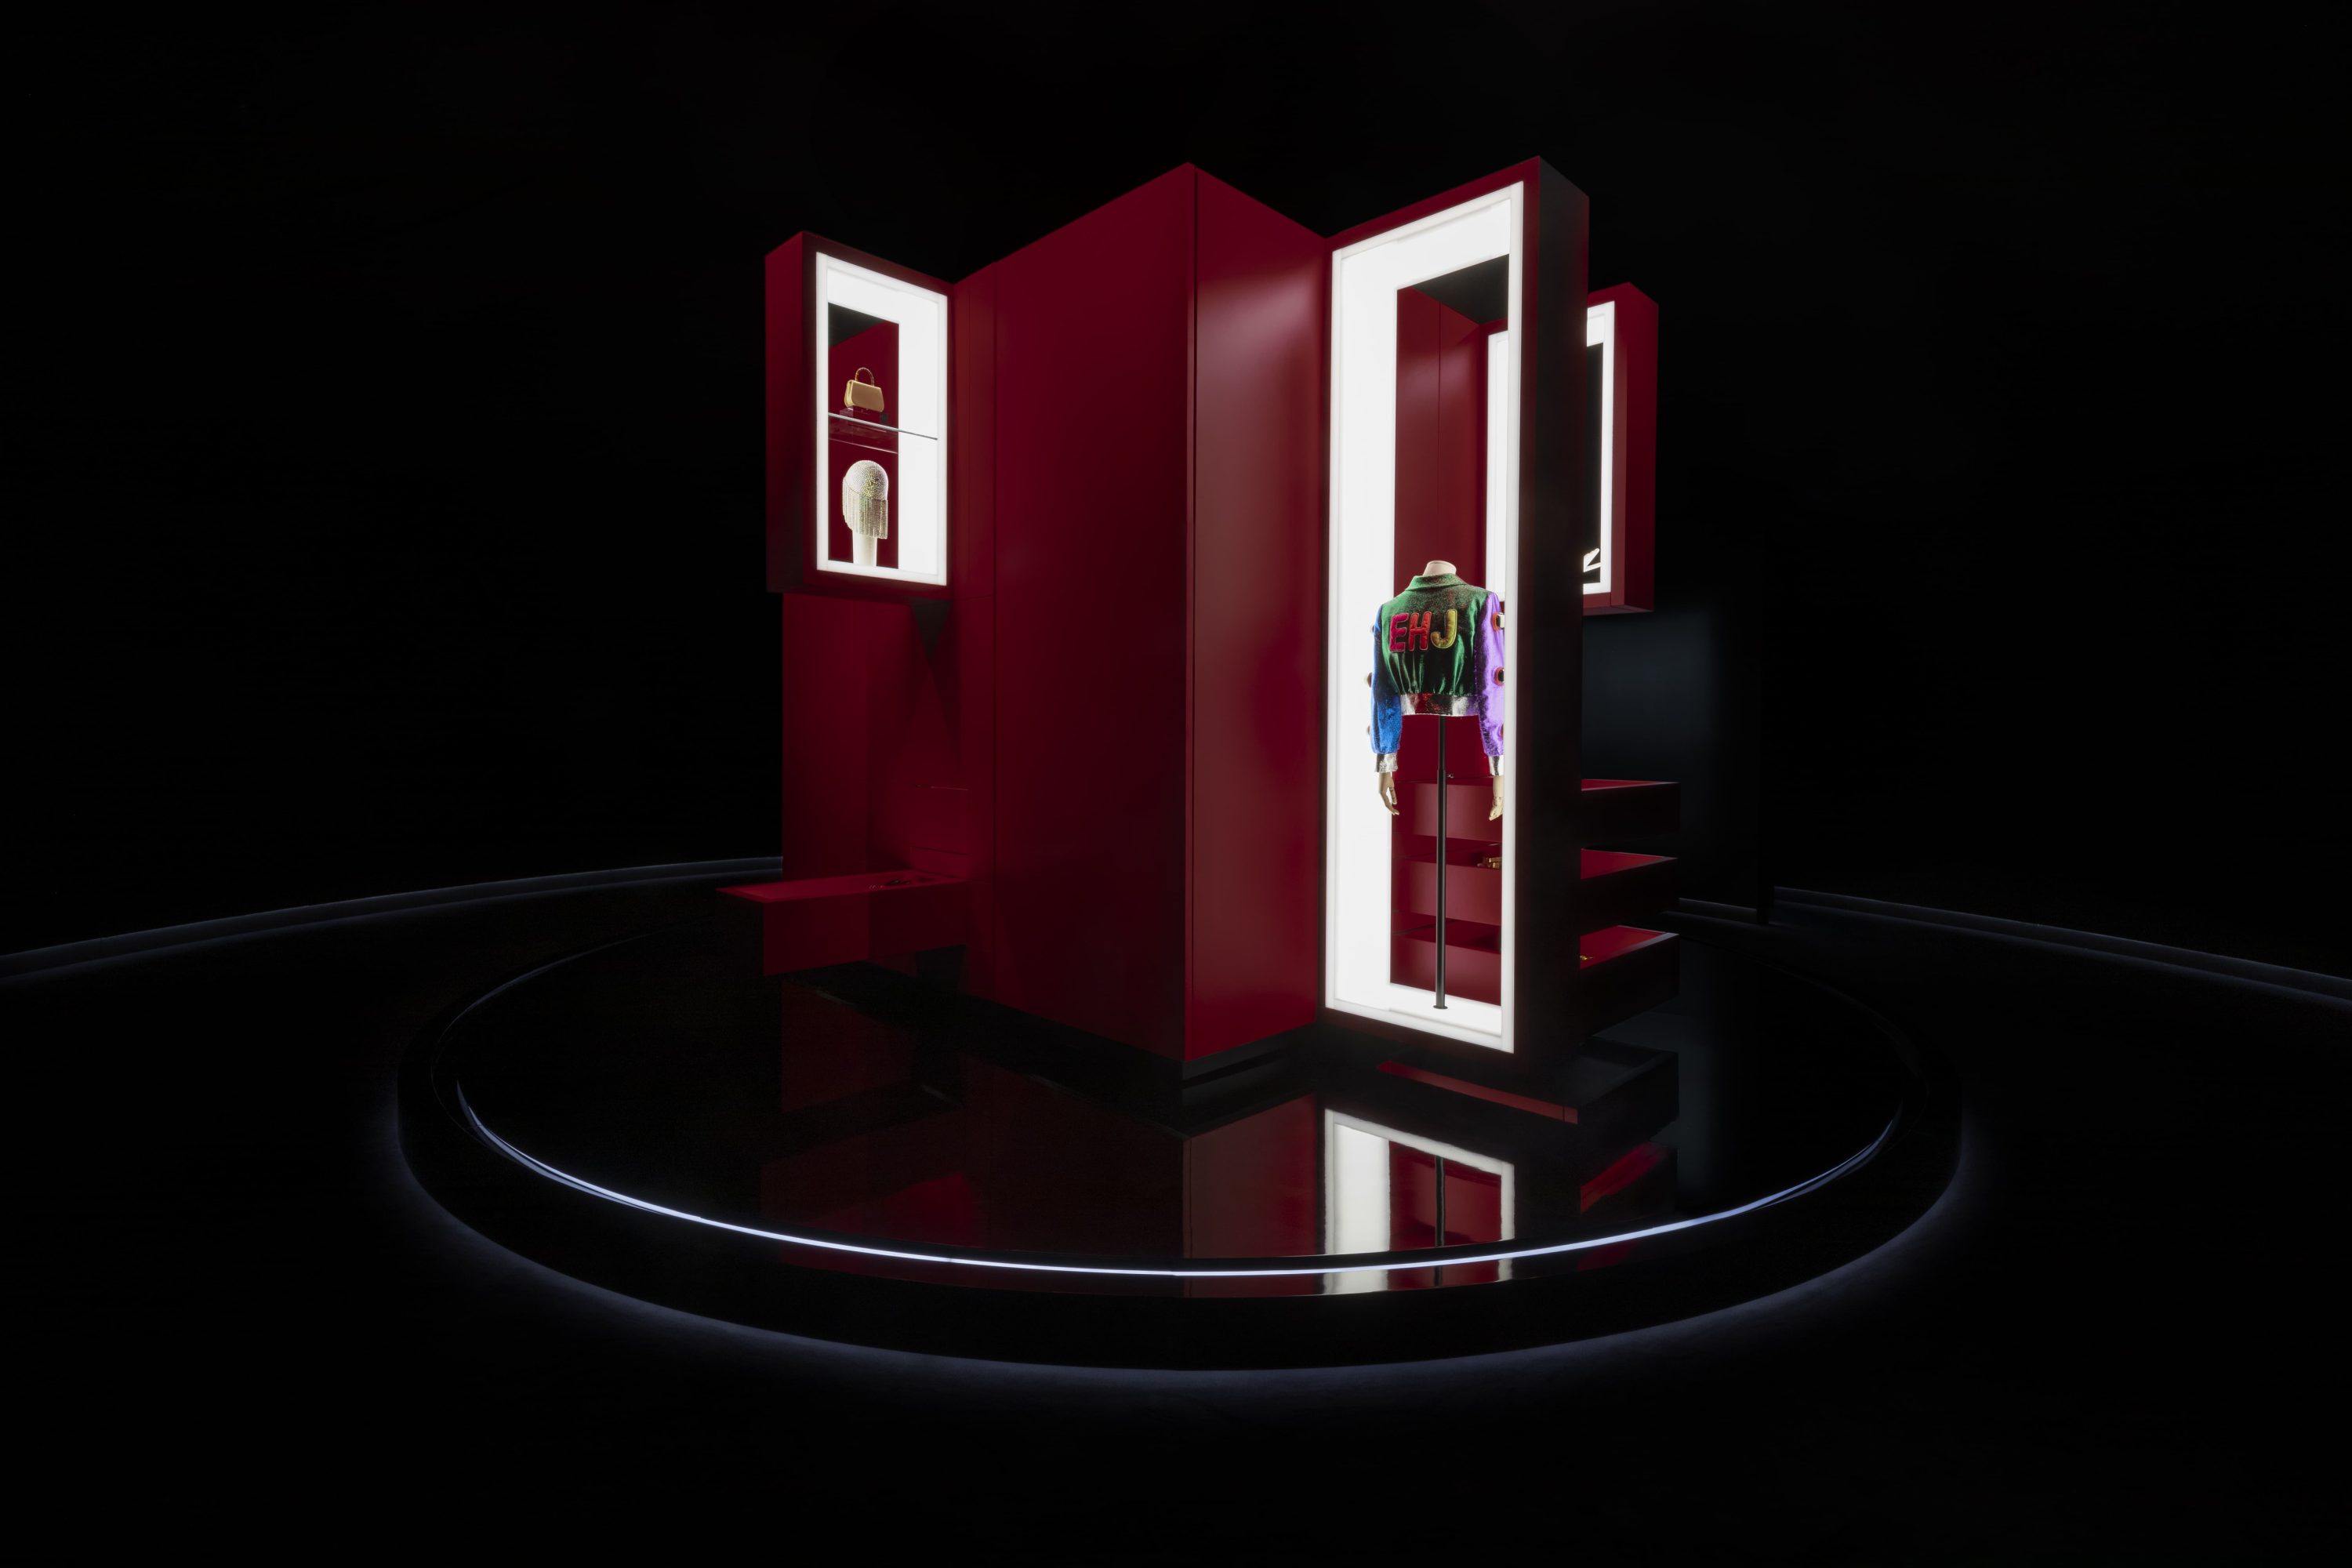 In occasion of the Gucci Cosmos exhibition in Shanghai, Global